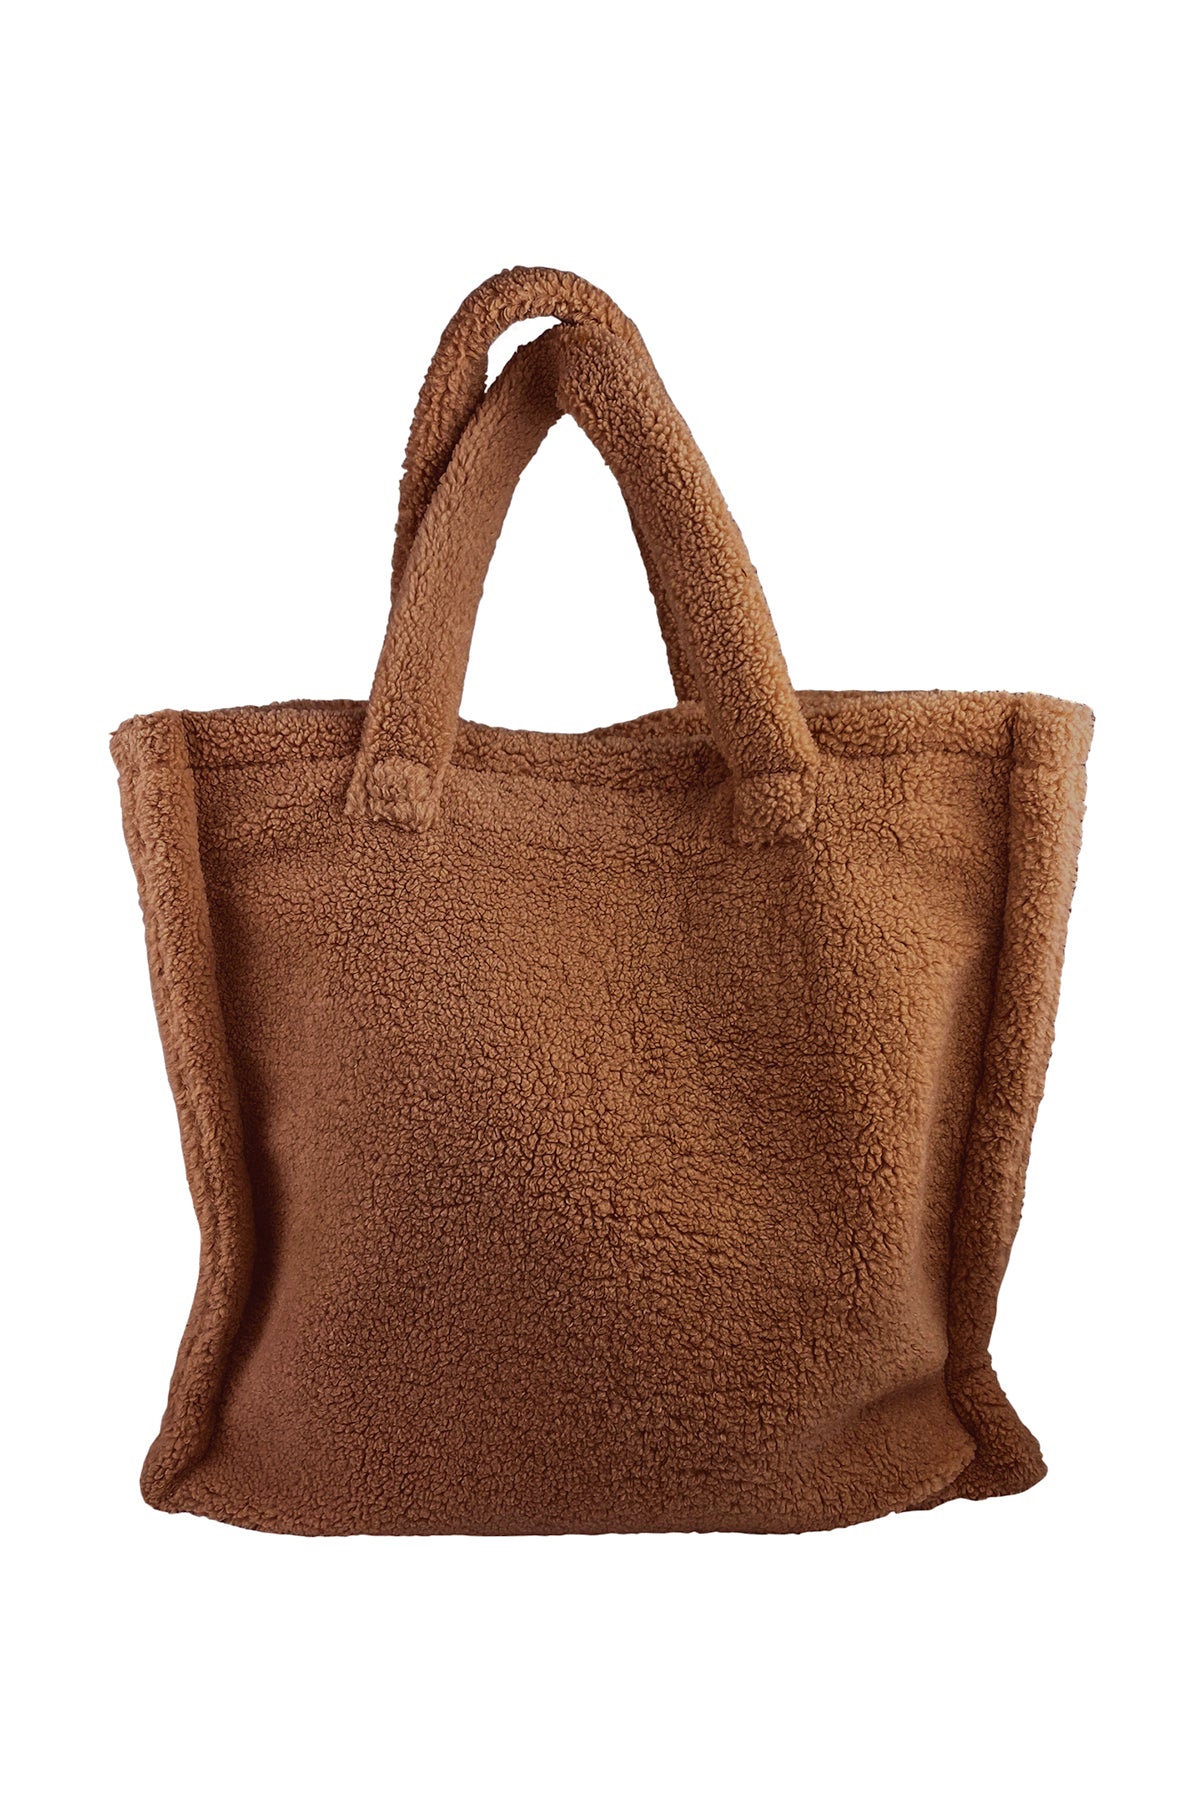 LARGE TEDDY TOTE